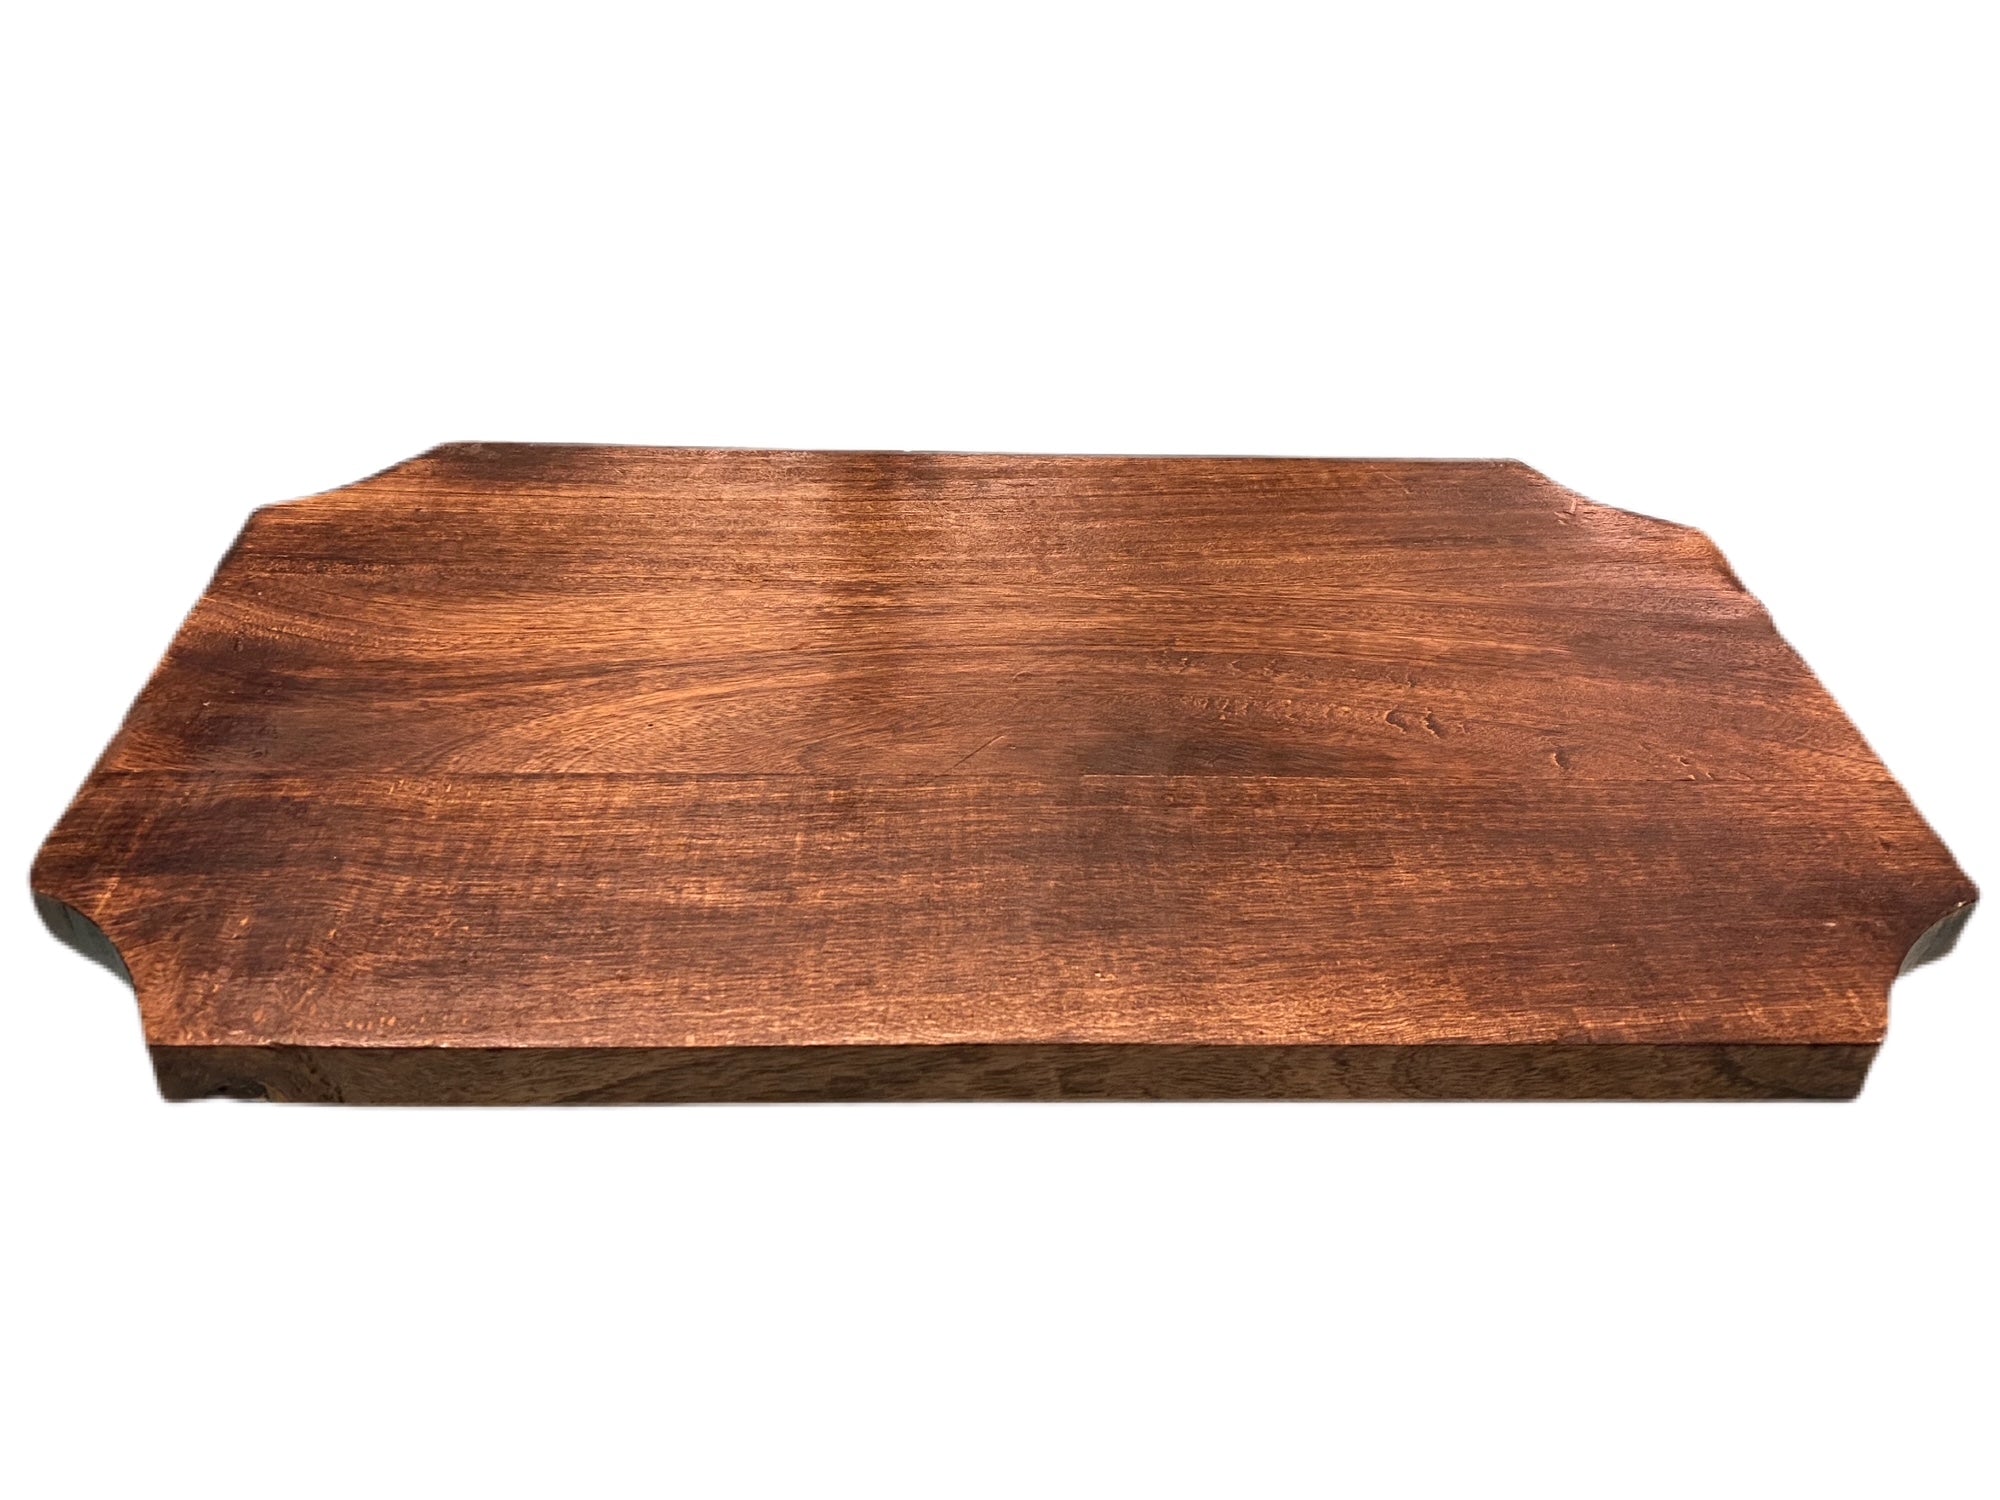 Large Chopping Board with Hairpin Legs - The Cooks Cupboard Ltd